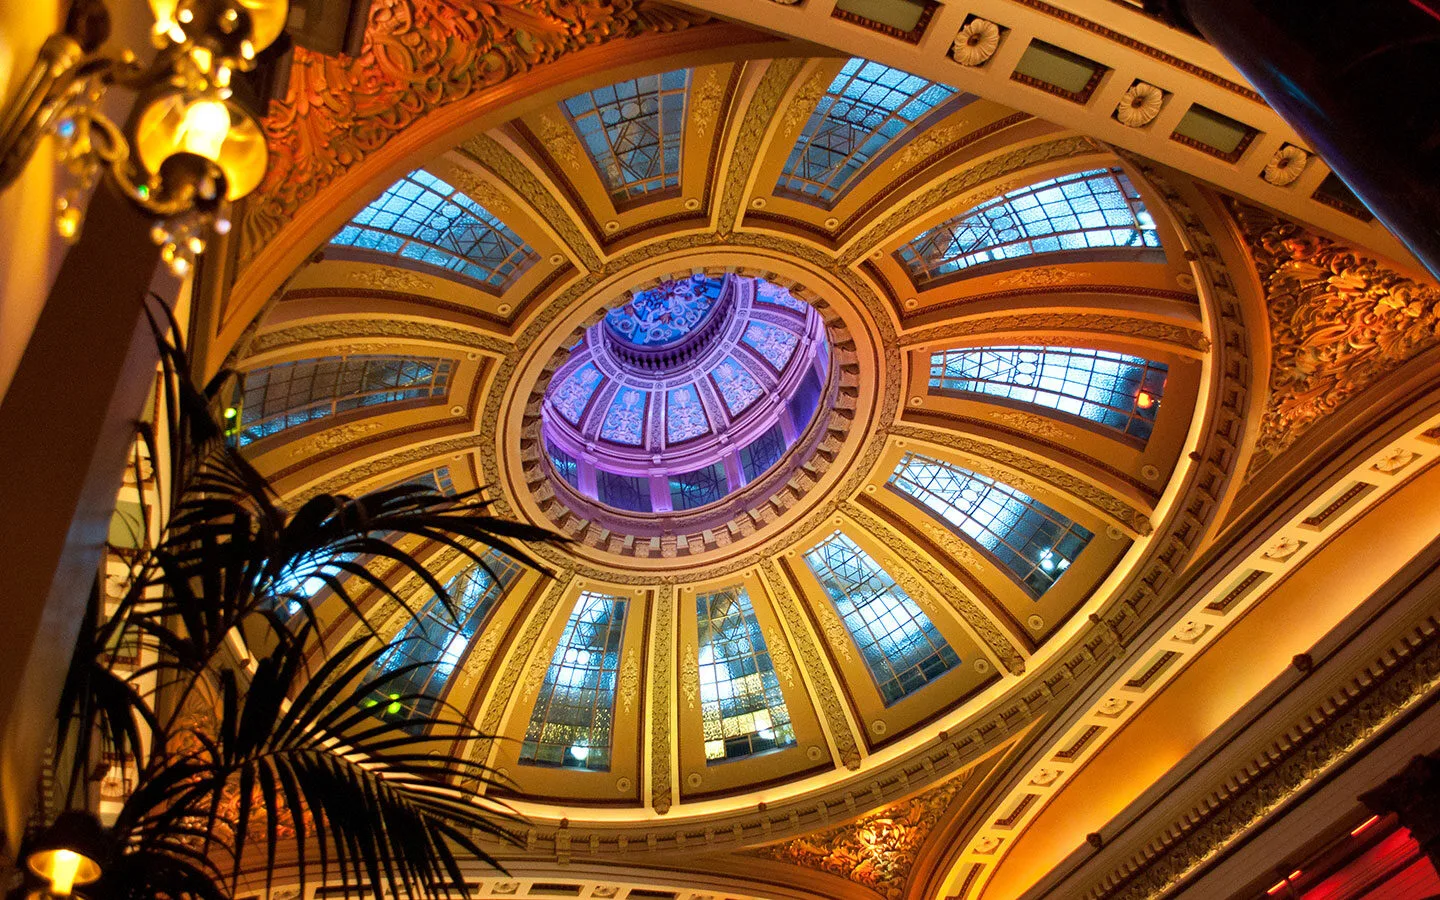 Ornate ceiling at The Dome restaurant and bar in Edinburgh